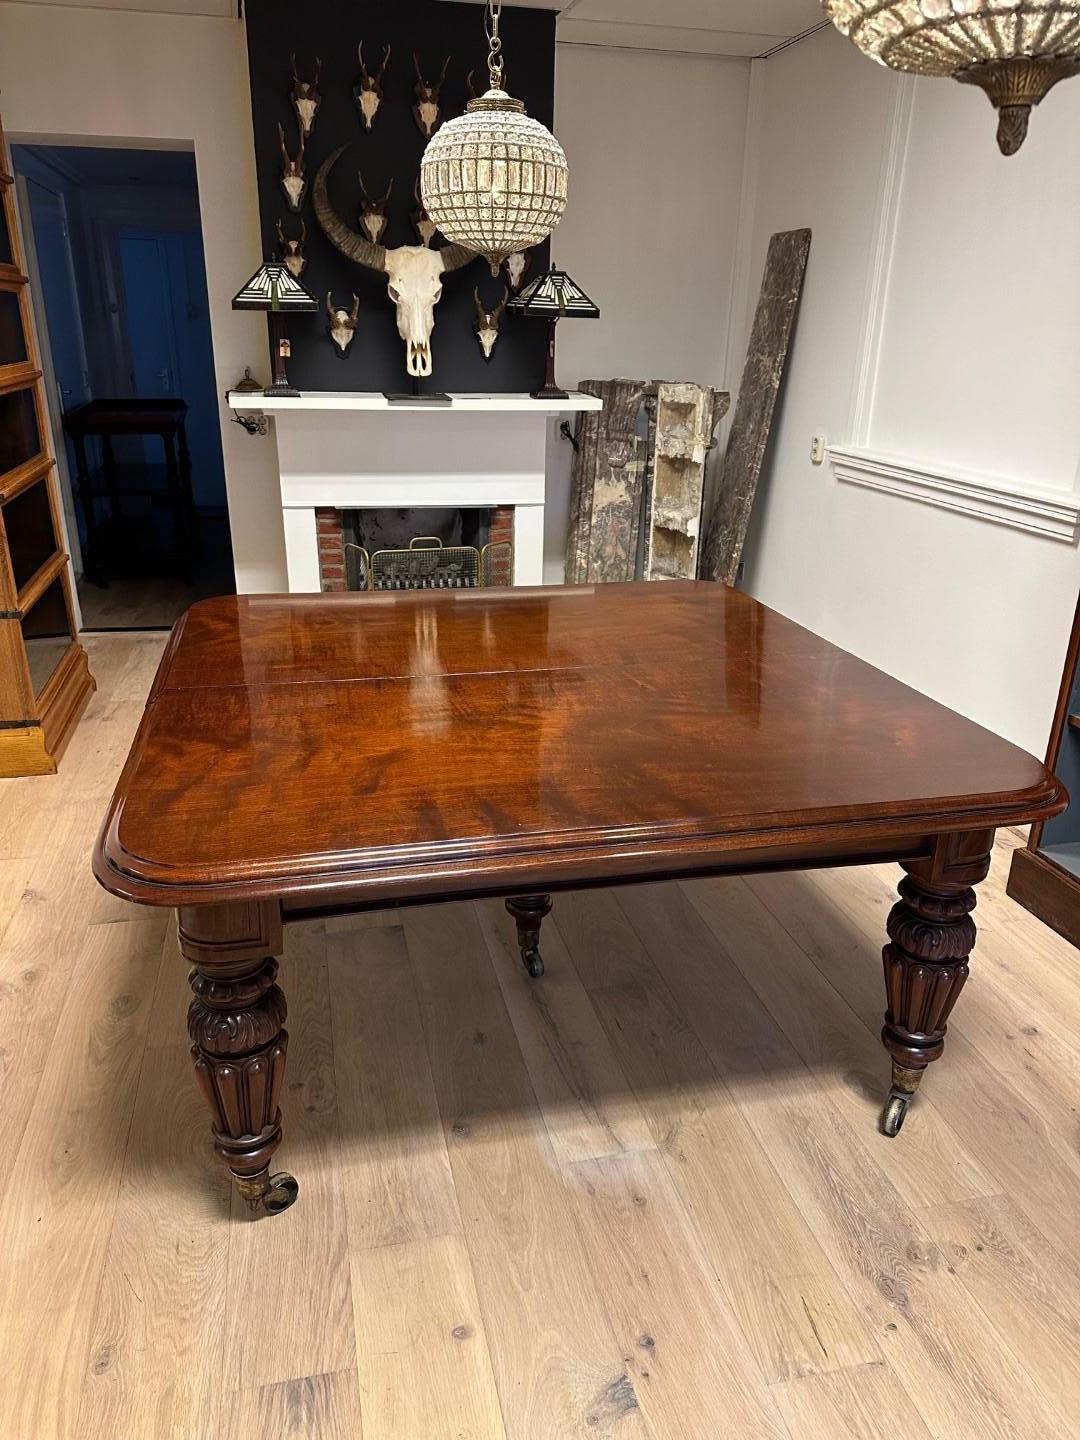 Large impressive antique mahogany dining room table. Beautiful stylish leg and equipped with a 5th leg for extra stability.
The sliding system runs smoothly. The extra leaves allow the table to be set up in different lengths. The extra tops are not